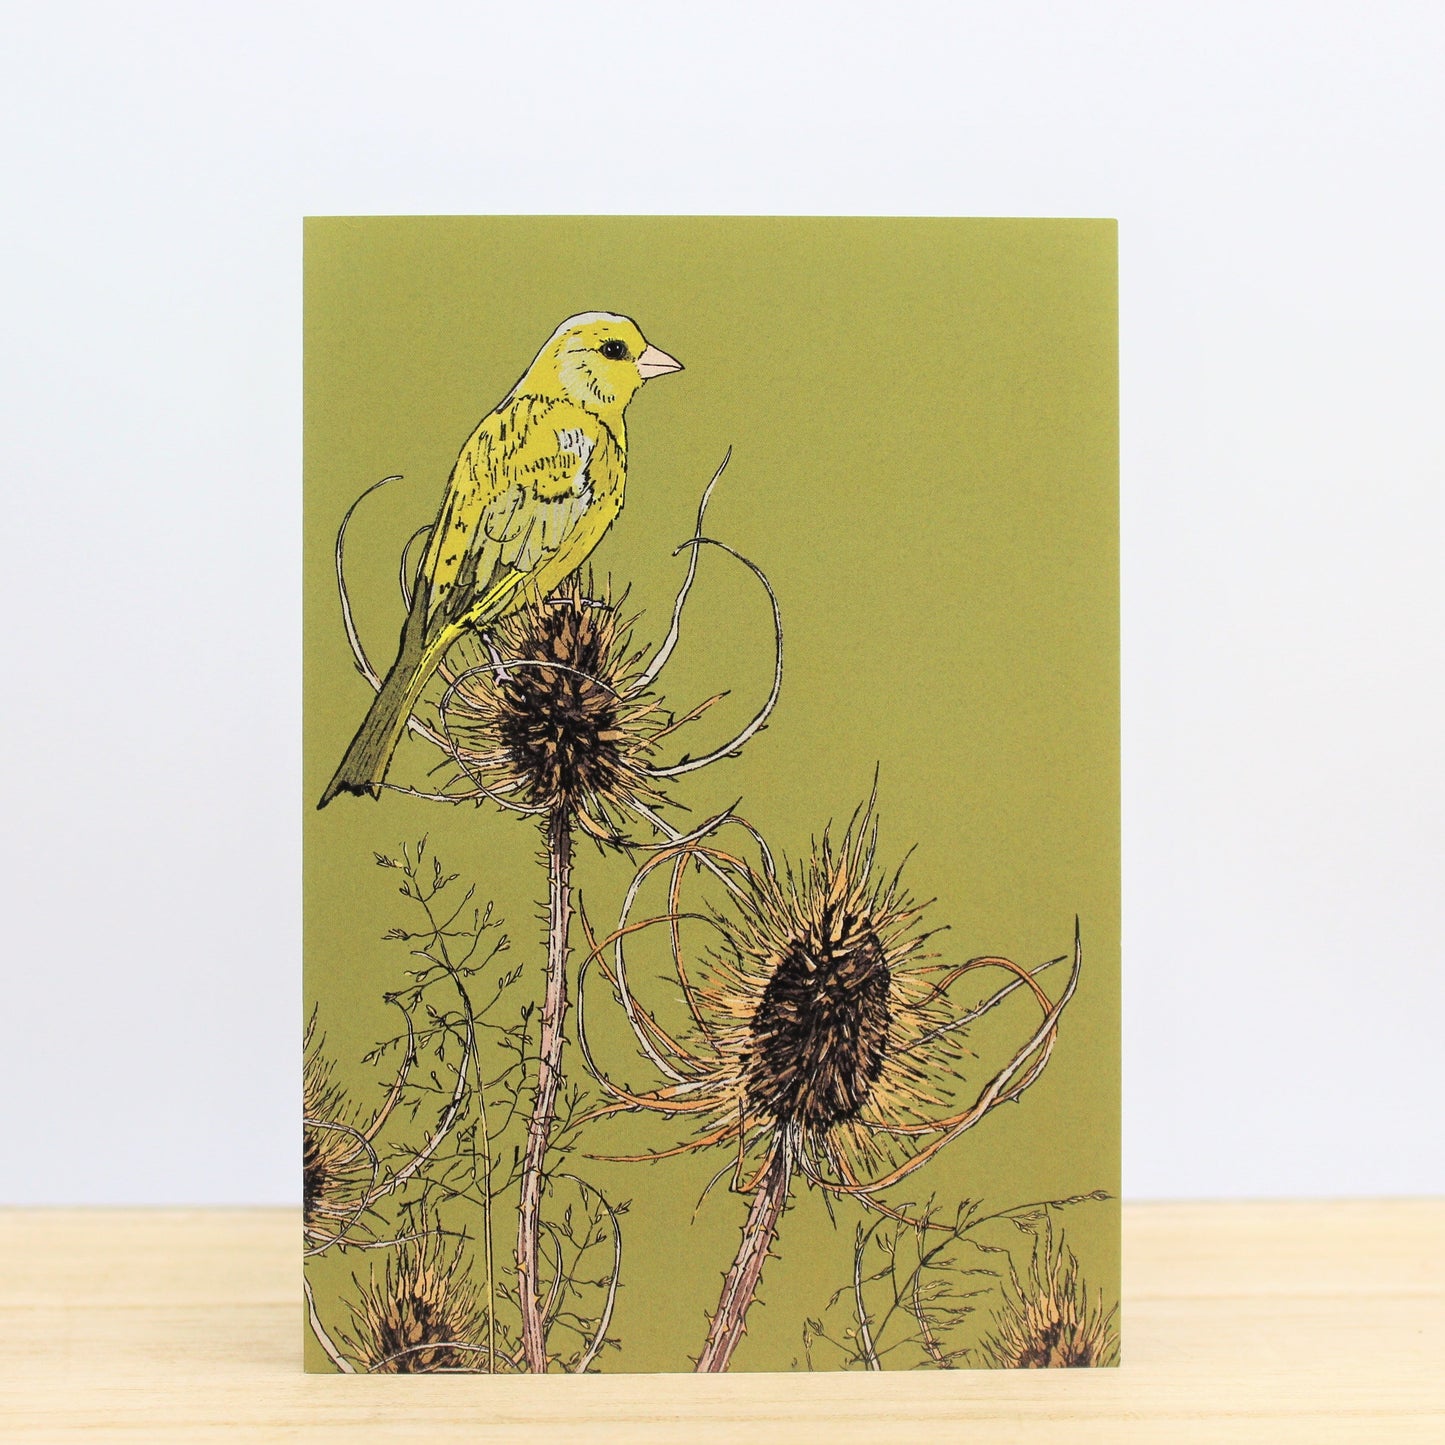 Planting with Nature: 10 Notecard Set